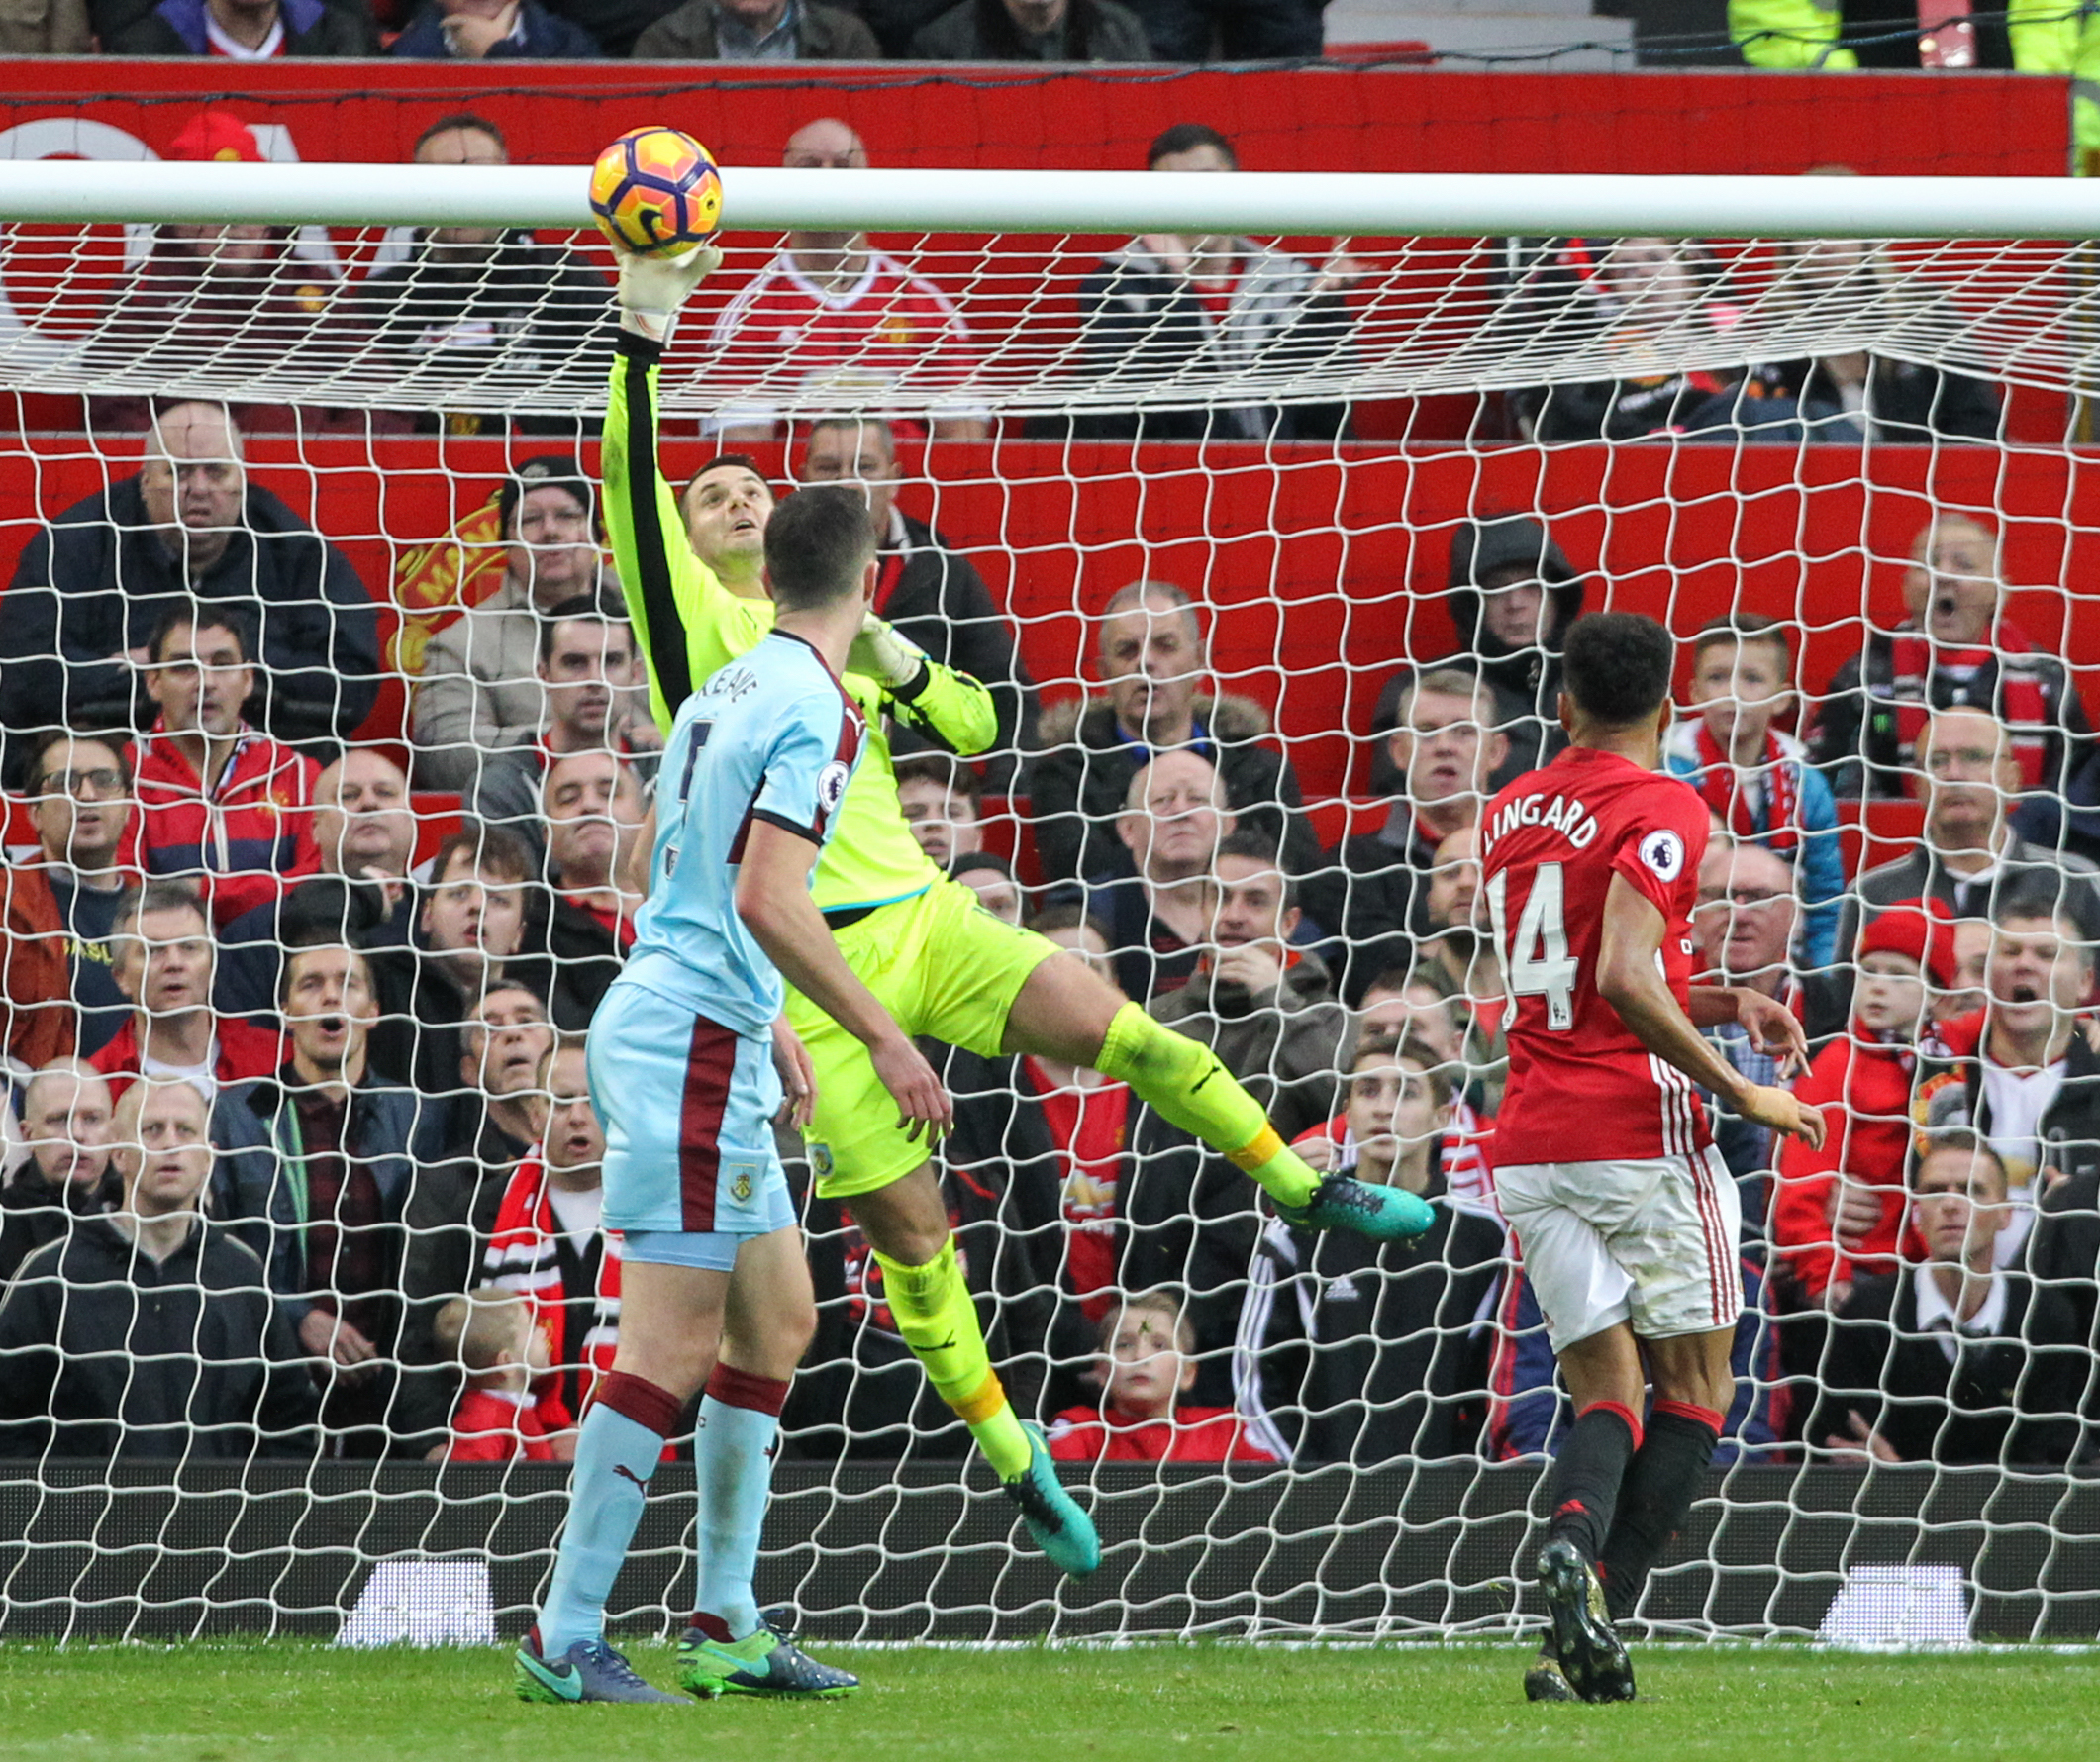 'It was a nice reception' - Old Trafford clean-sheet even sweeter for Burnley's Tom Heaton - Lancashire Telegraph